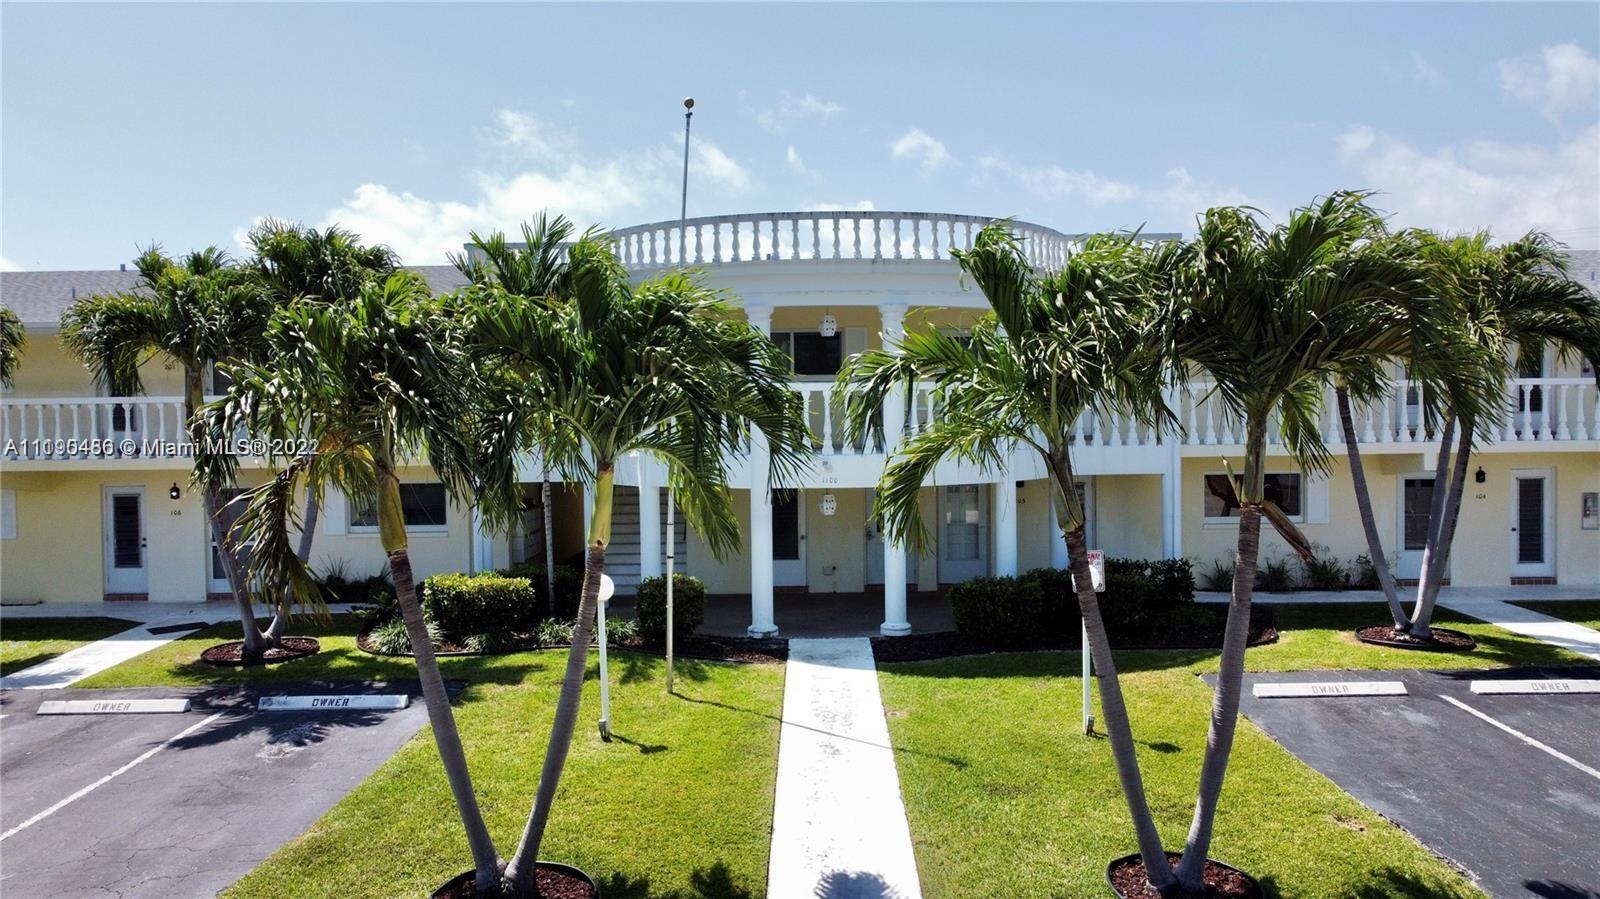 Motivated Seller! 2/2 Condo with boat dock, amazing canal view overlooking stunning mansions. Corner